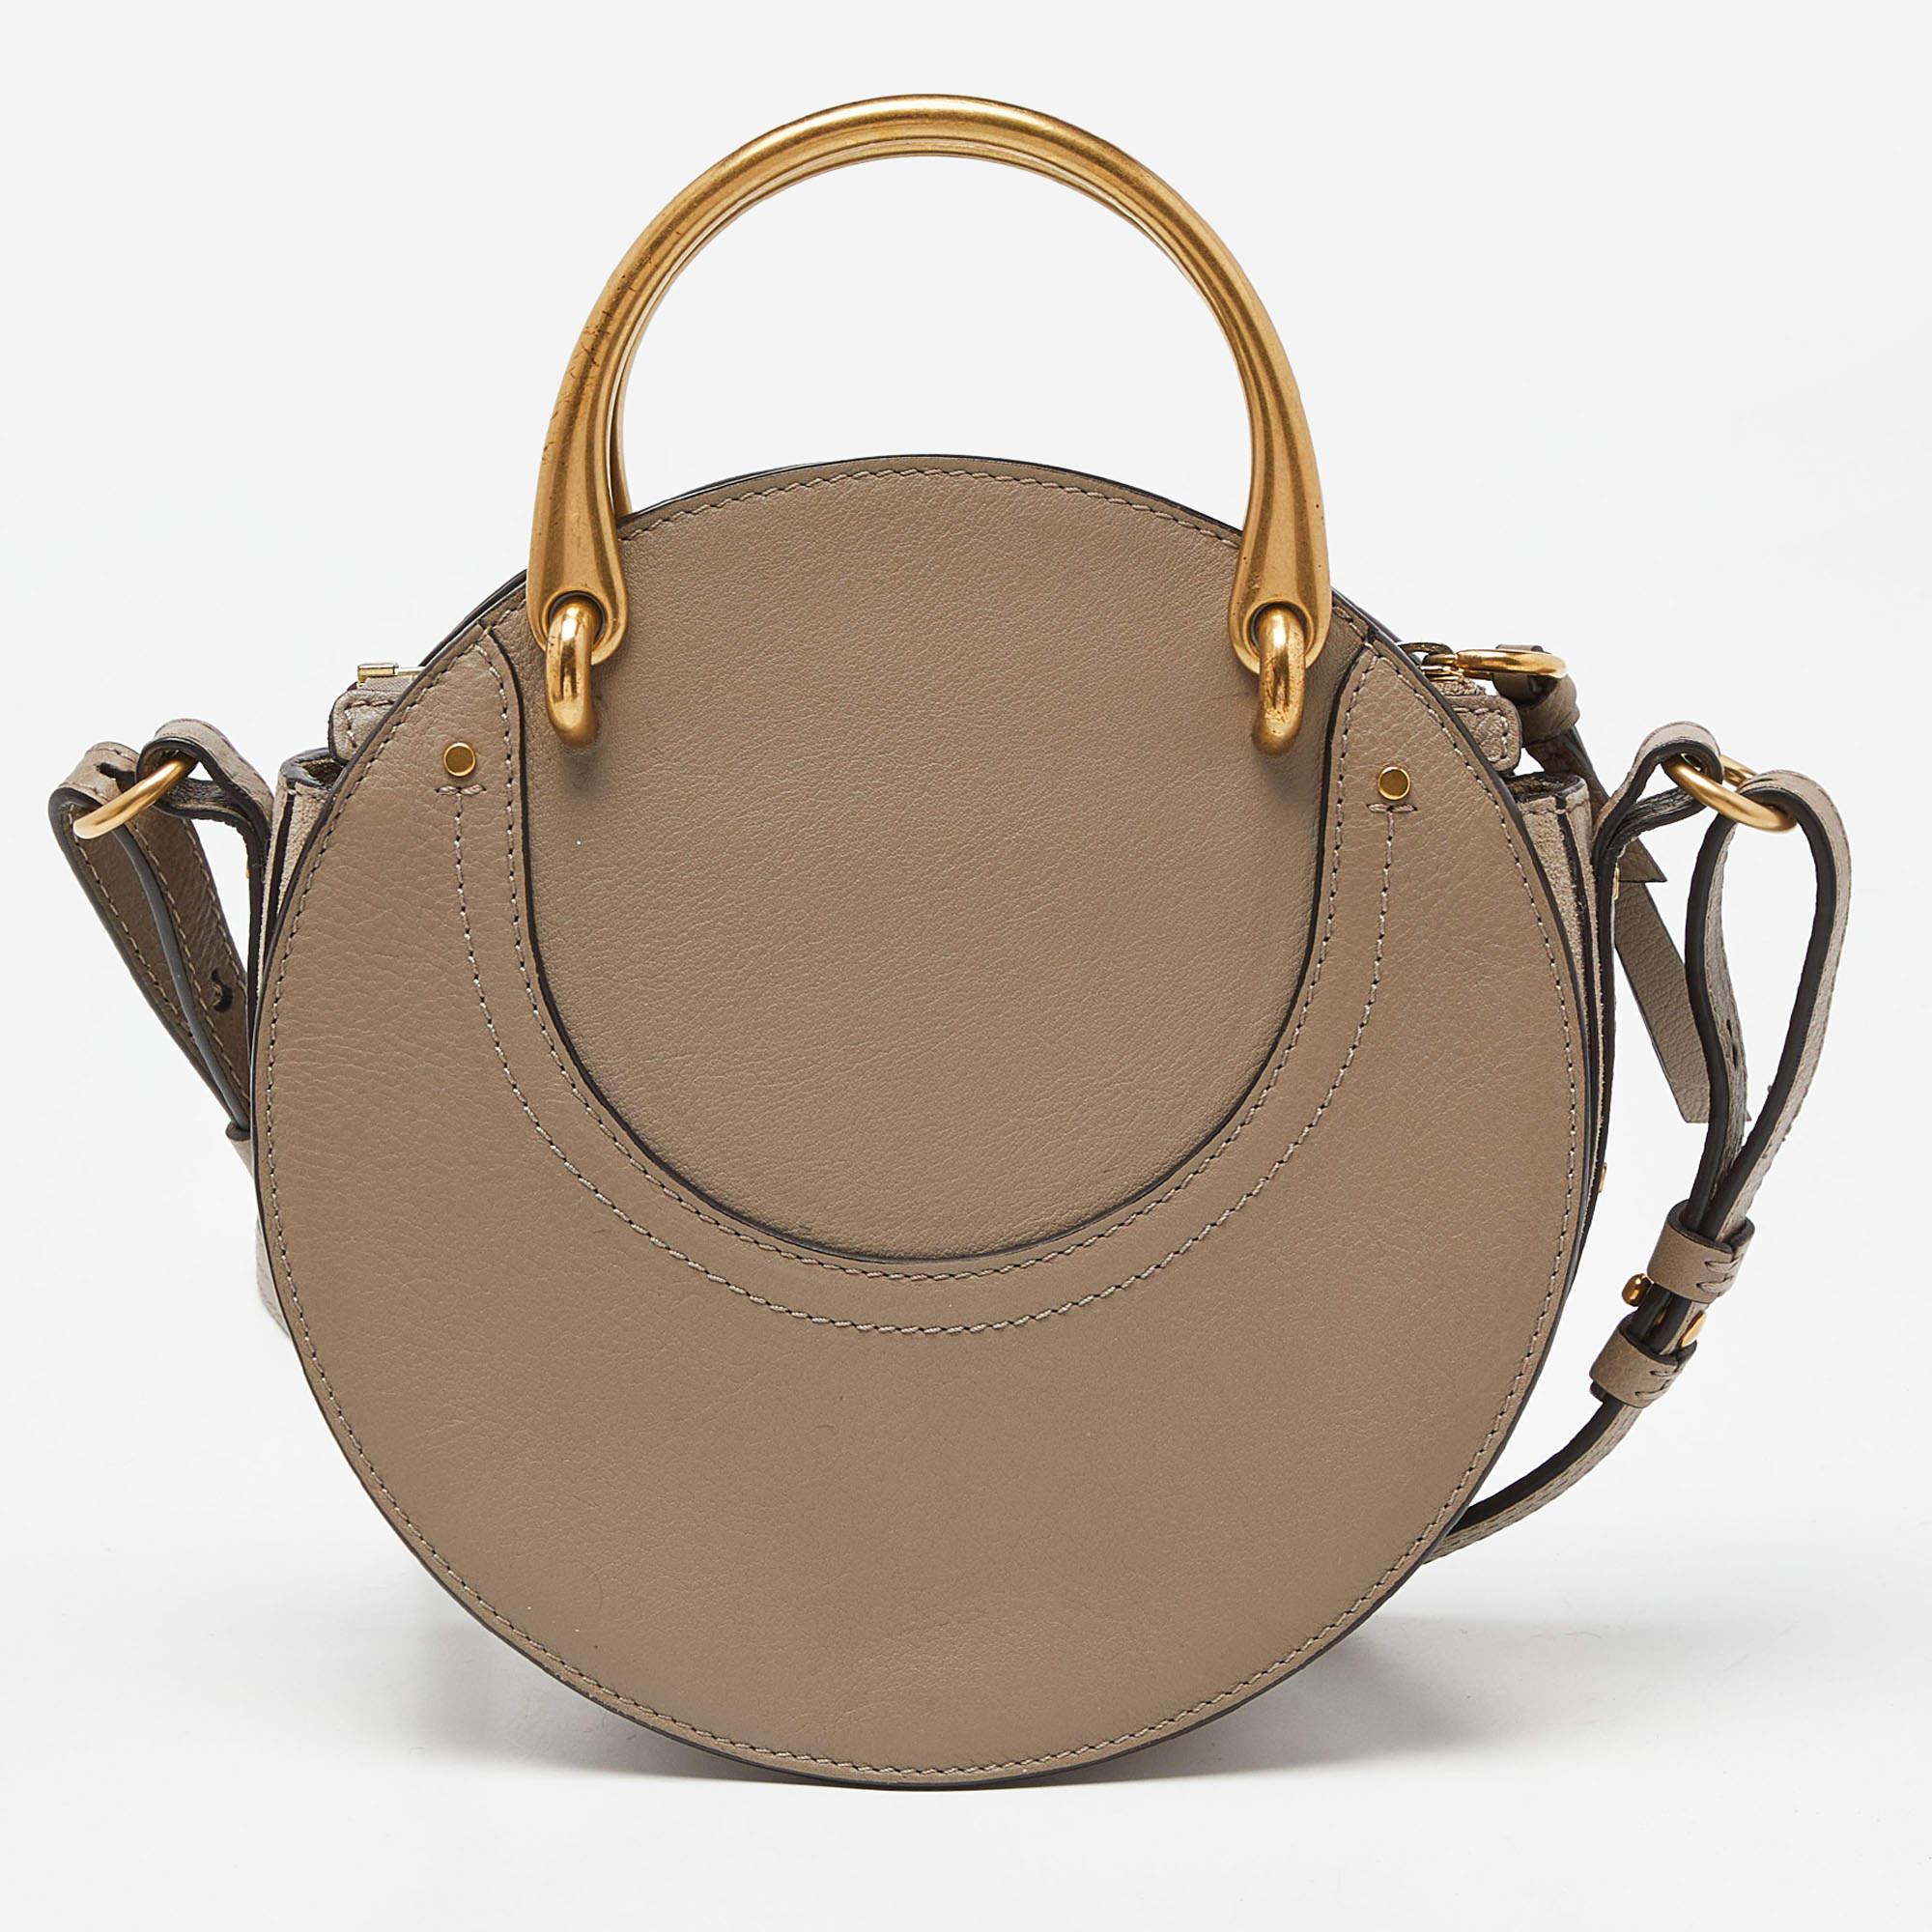 Give your totes and hobos a rest and opt for a light accessory when you're heading out, like this Pixie bag from Chloé! The leather & suede bag is compact and versatile in design. It has a round shape and it is held by two gold-tone handles that